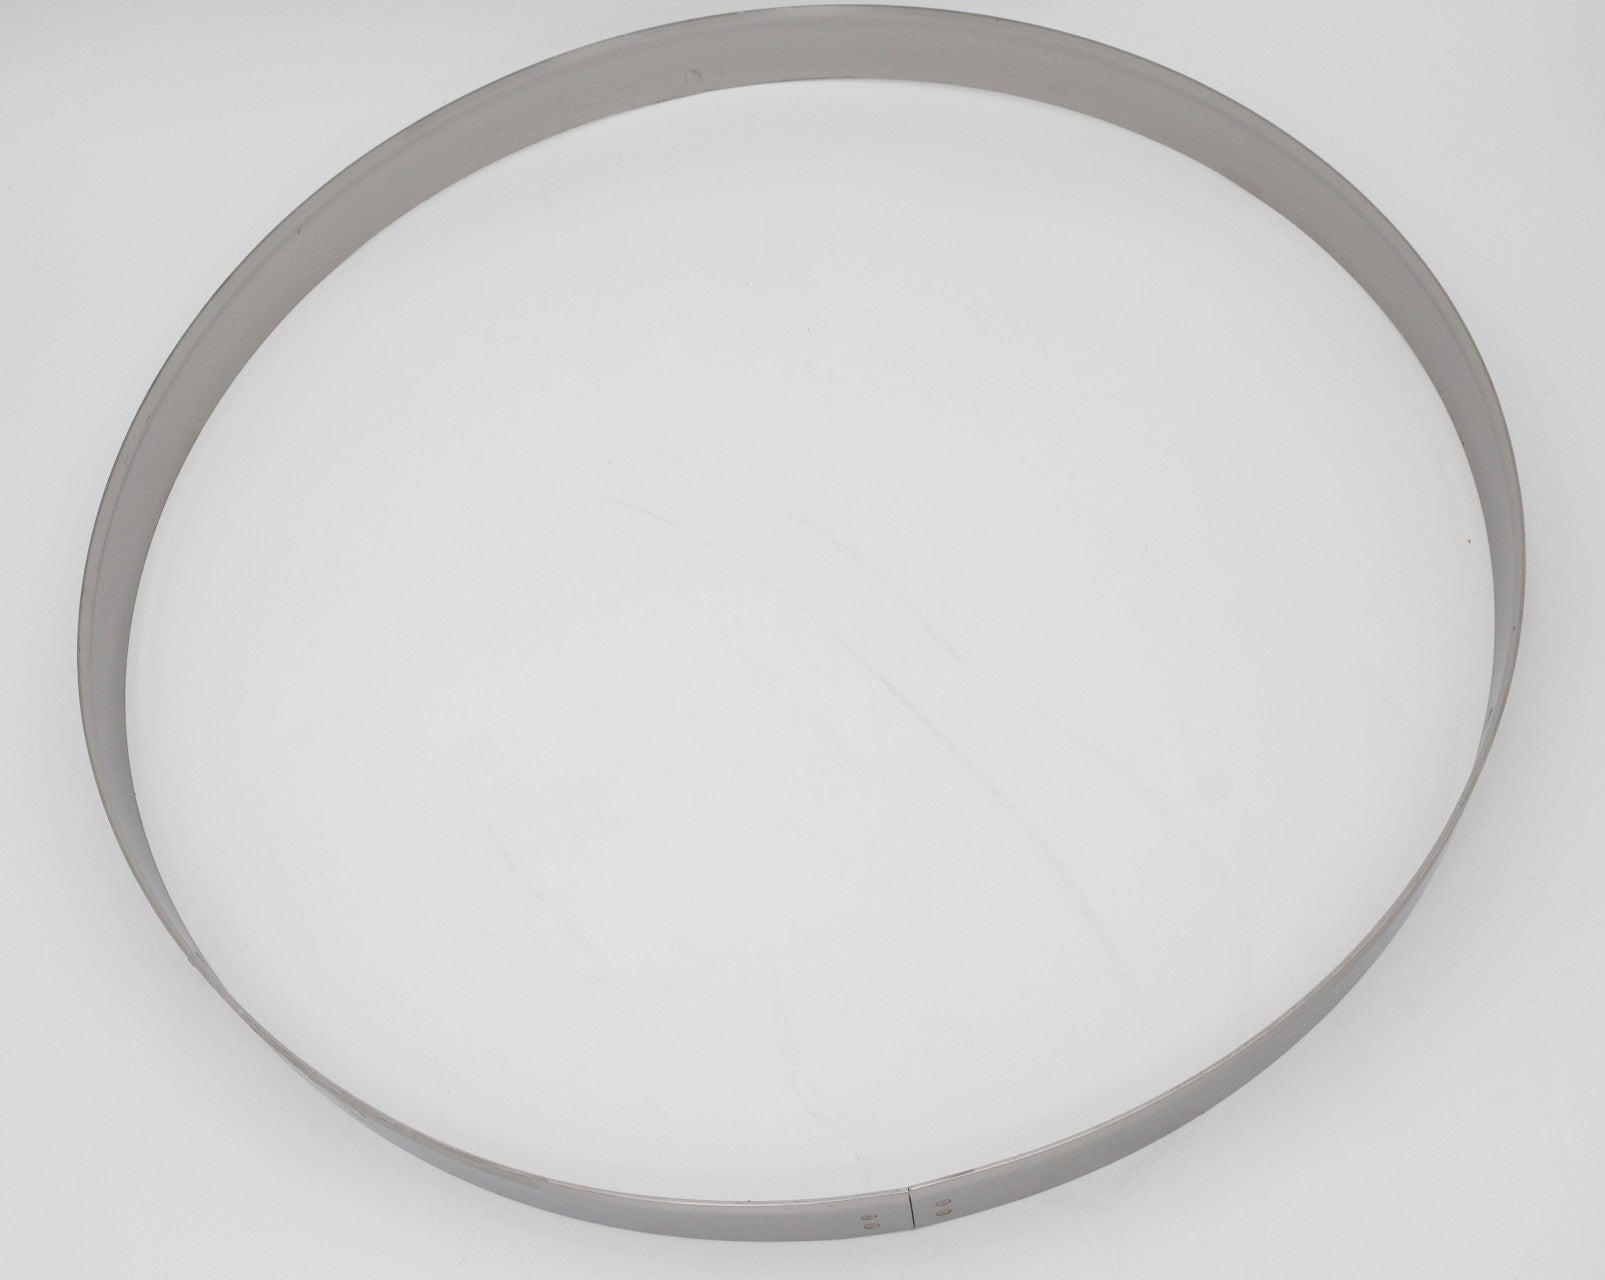 Pentair 19" Stainless Steel Backup Ring for Filters 195339 - Pool Filter Parts - img-2